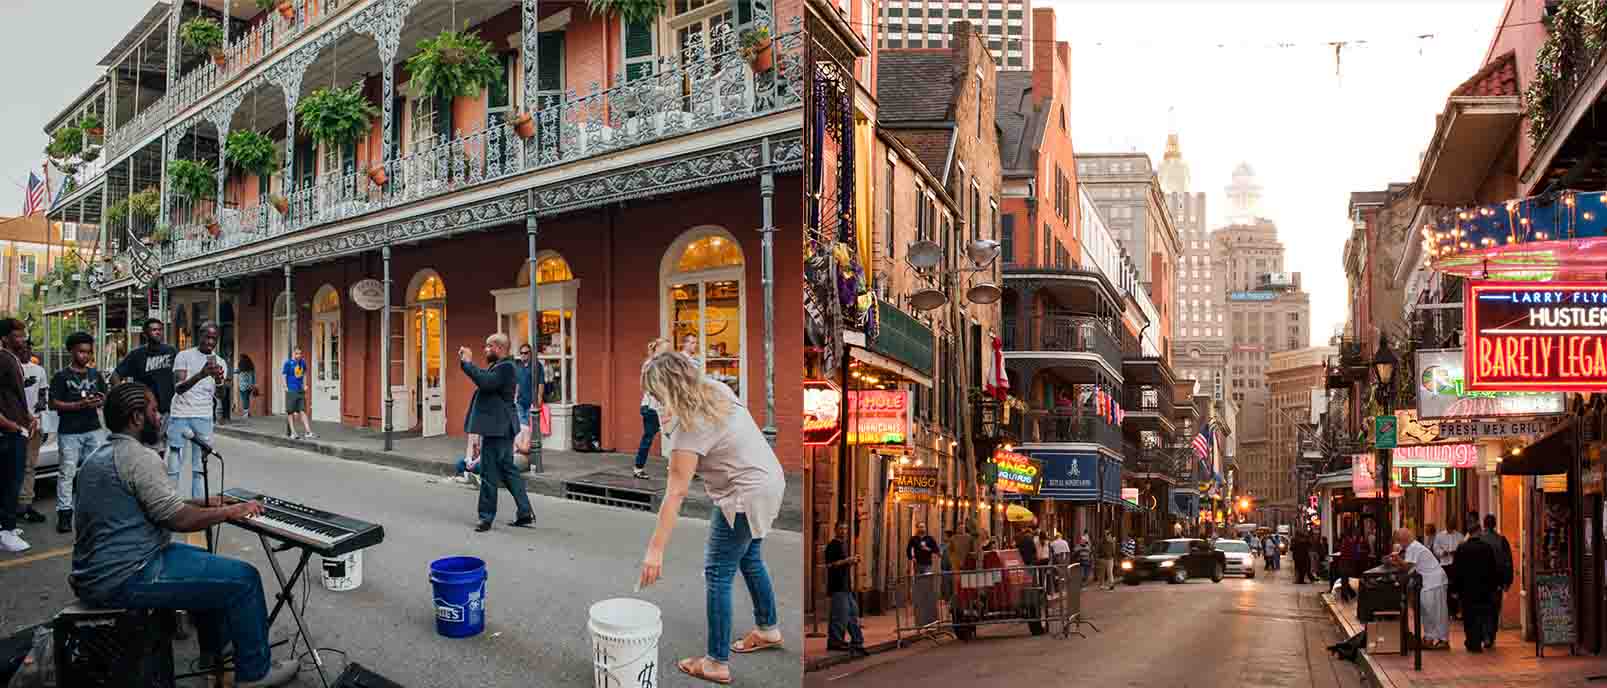 New Orleans French Quarter and Bourbon Street